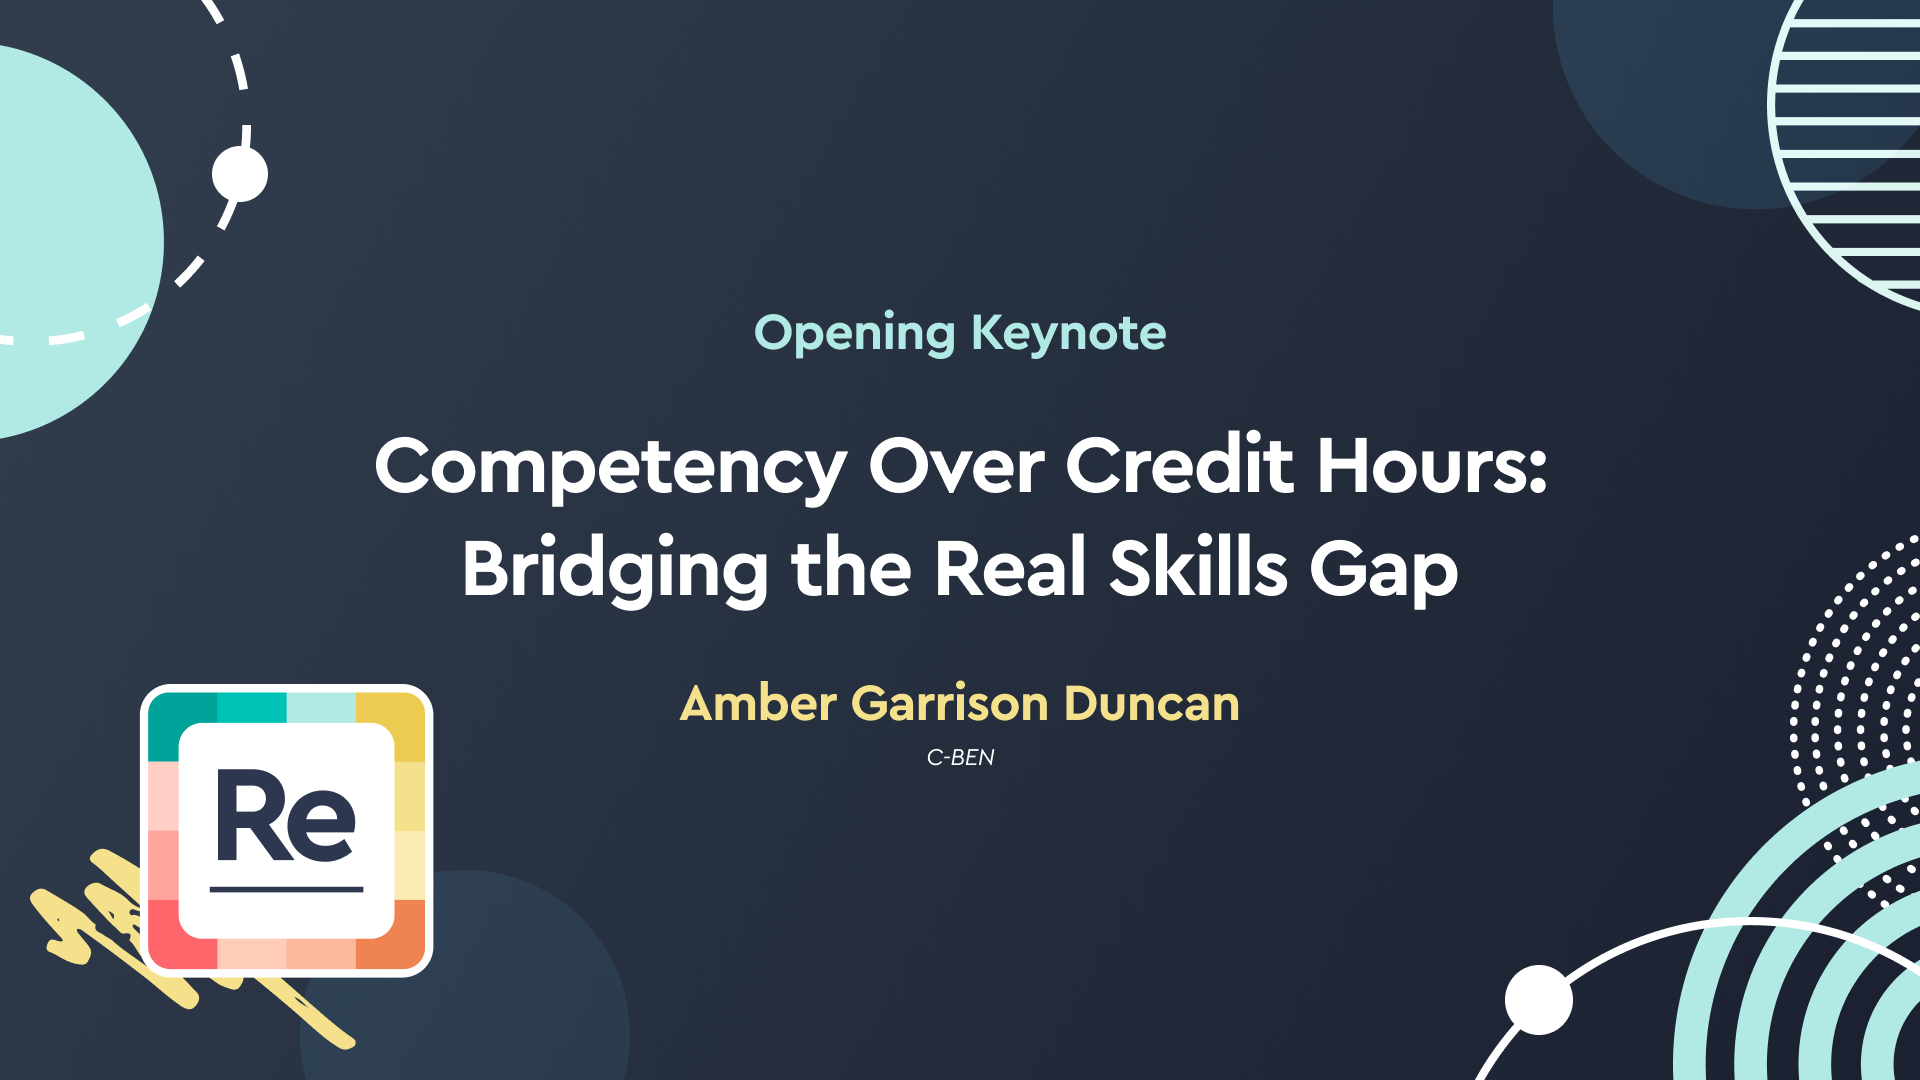 Competency Over Credit Hours: Bridging the Real Skills Gap